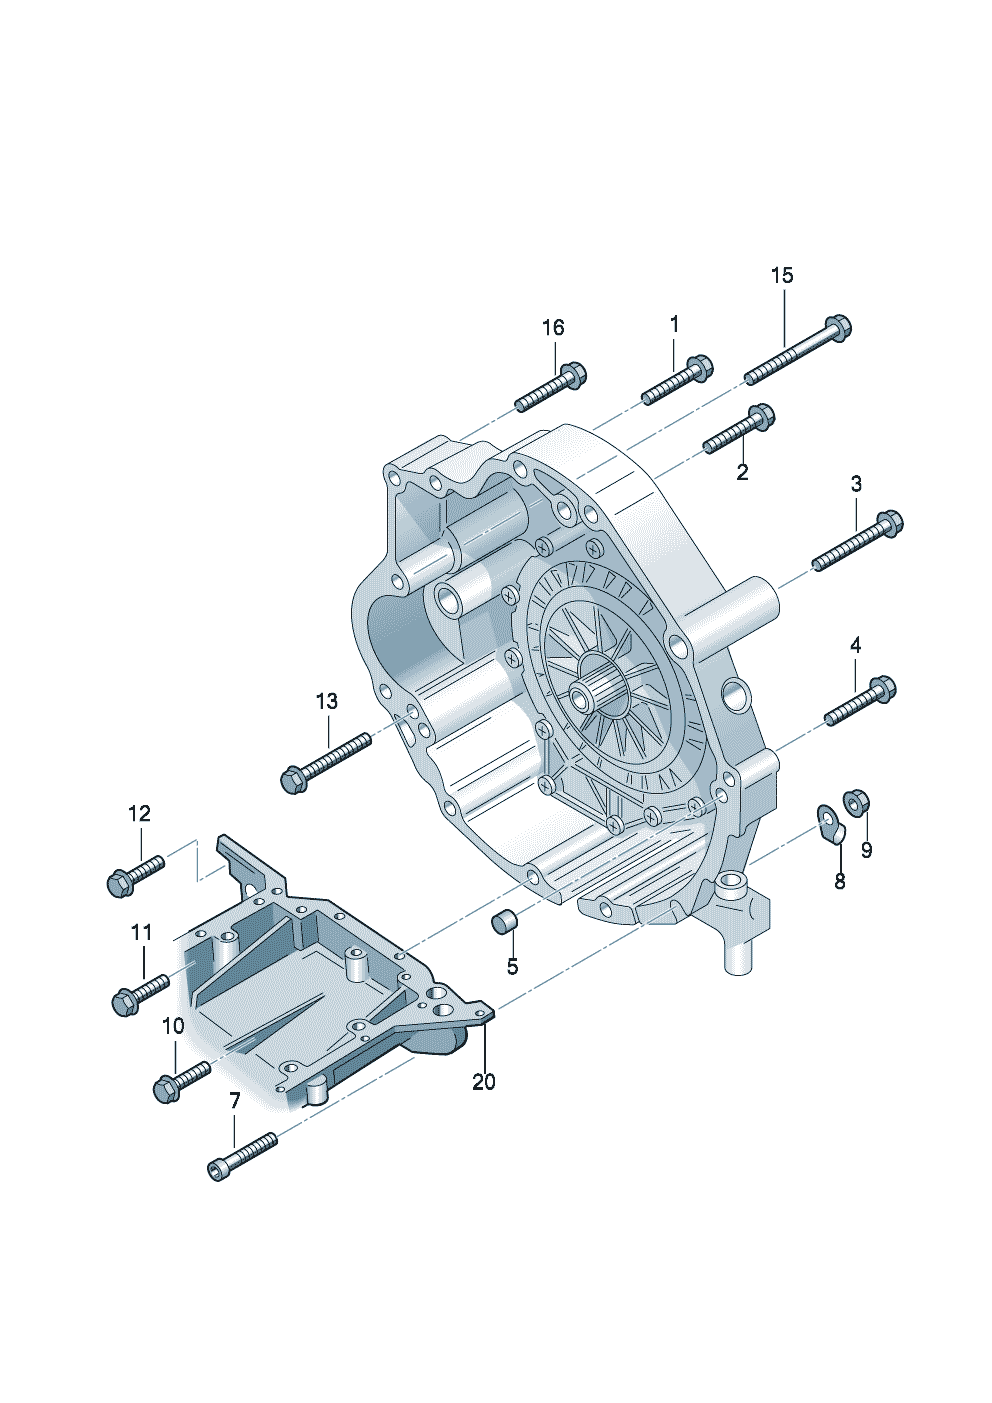 mounting parts for engine and<br>transmission6-speed automatic gearbox with<br>interaxle differential 4.2 Ltr. - Audi A4/Avant - a4